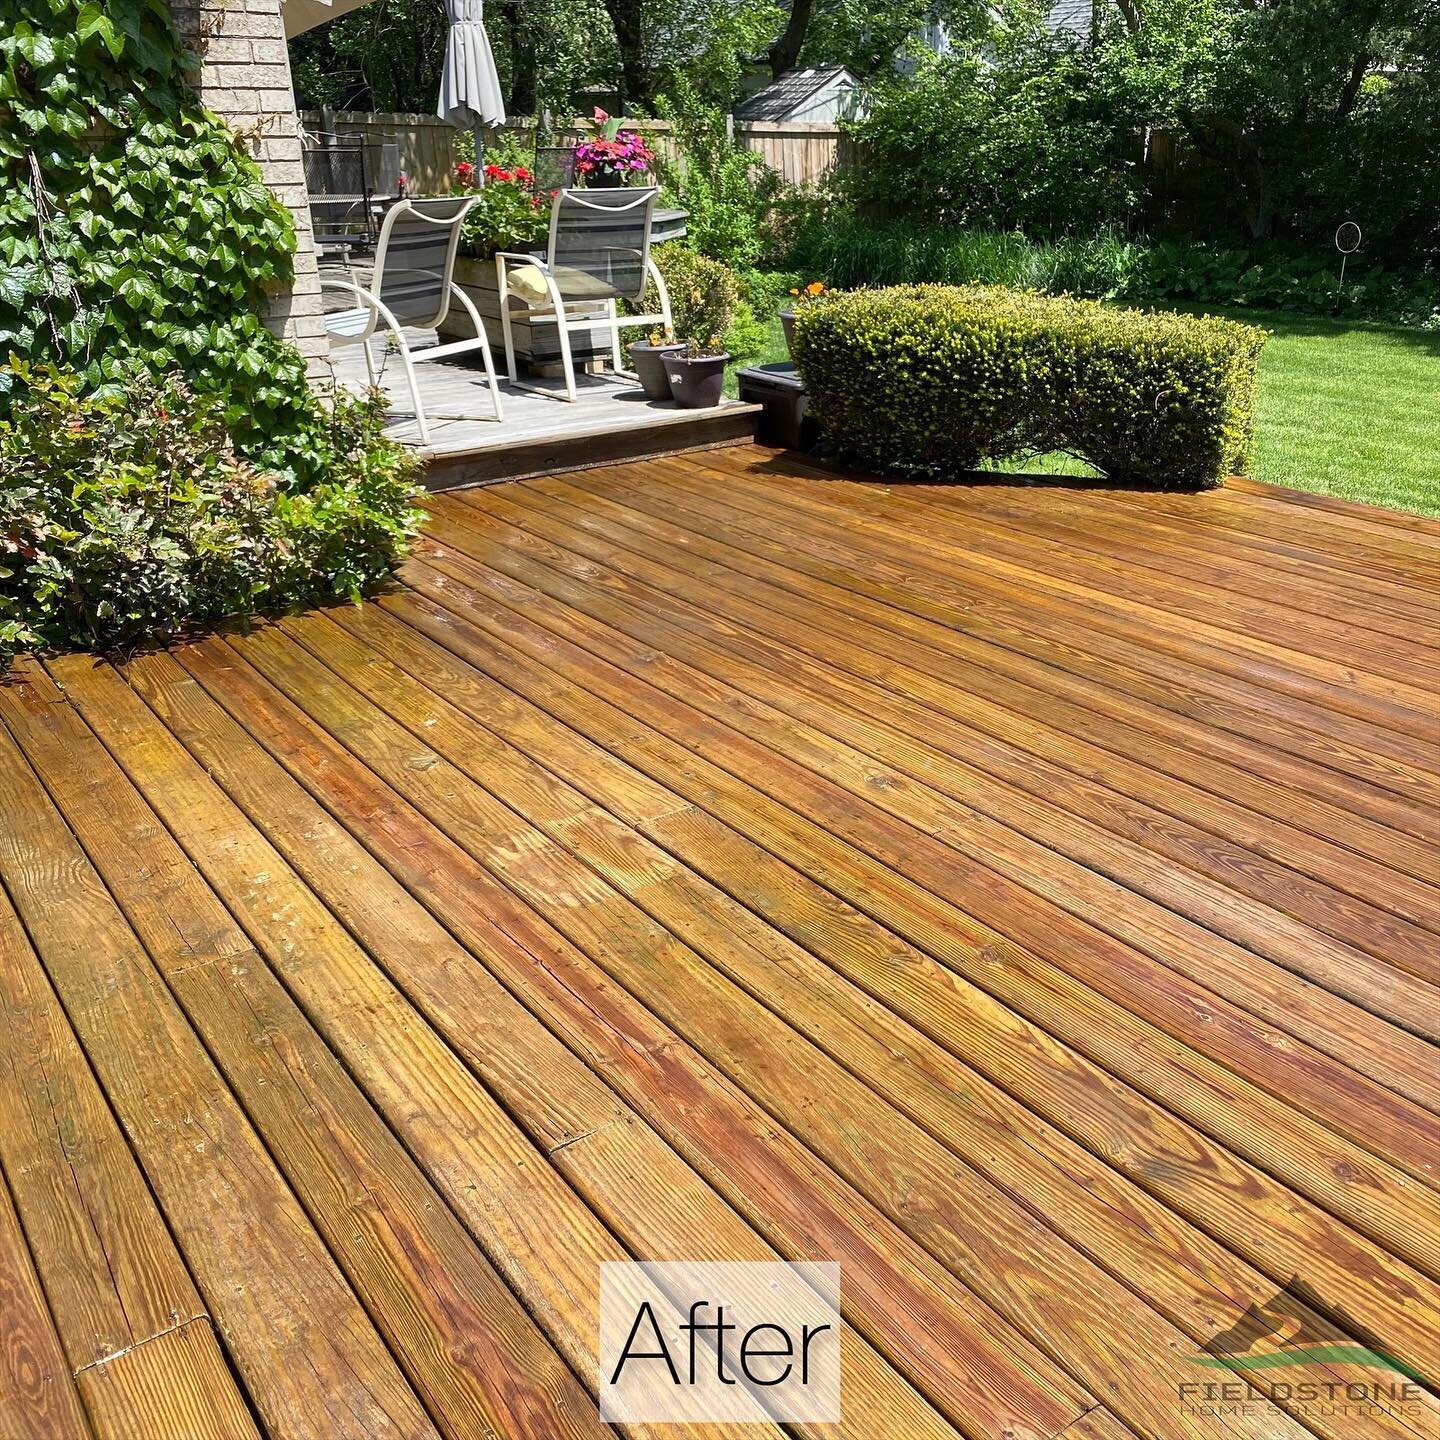 Deck: After -&gt; Before

Contact @fieldstonehomesolutions to schedule power washing for a deck, patio, or driveway refresh today!

@dewalttough 2100 PSI electric pressure washer - claiming the top spot of new favorite tool

#fieldstonehomesolutions 